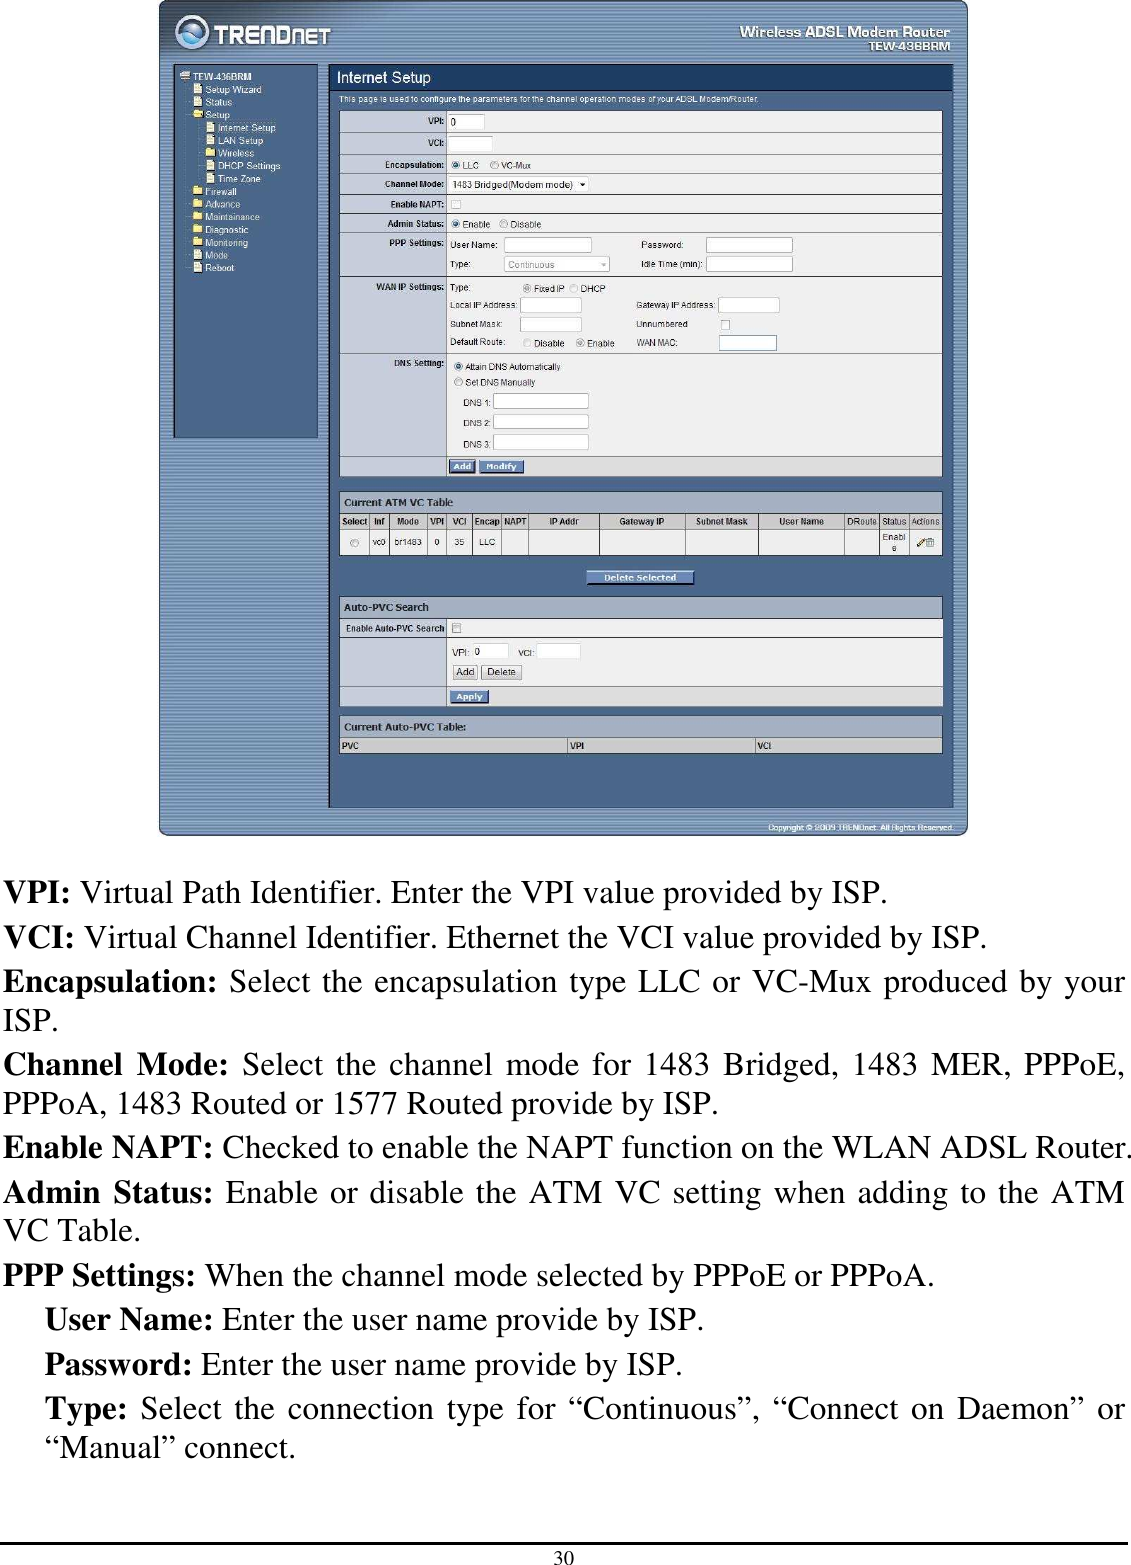 30   VPI: Virtual Path Identifier. Enter the VPI value provided by ISP. VCI: Virtual Channel Identifier. Ethernet the VCI value provided by ISP. Encapsulation: Select the encapsulation type LLC or VC-Mux produced by your ISP. Channel  Mode: Select the channel mode for 1483 Bridged, 1483 MER, PPPoE, PPPoA, 1483 Routed or 1577 Routed provide by ISP. Enable NAPT: Checked to enable the NAPT function on the WLAN ADSL Router. Admin Status: Enable or disable the ATM VC setting when adding to the ATM VC Table. PPP Settings: When the channel mode selected by PPPoE or PPPoA. User Name: Enter the user name provide by ISP. Password: Enter the user name provide by ISP. Type: Select the connection type for “Continuous”, “Connect on Daemon” or “Manual” connect. 